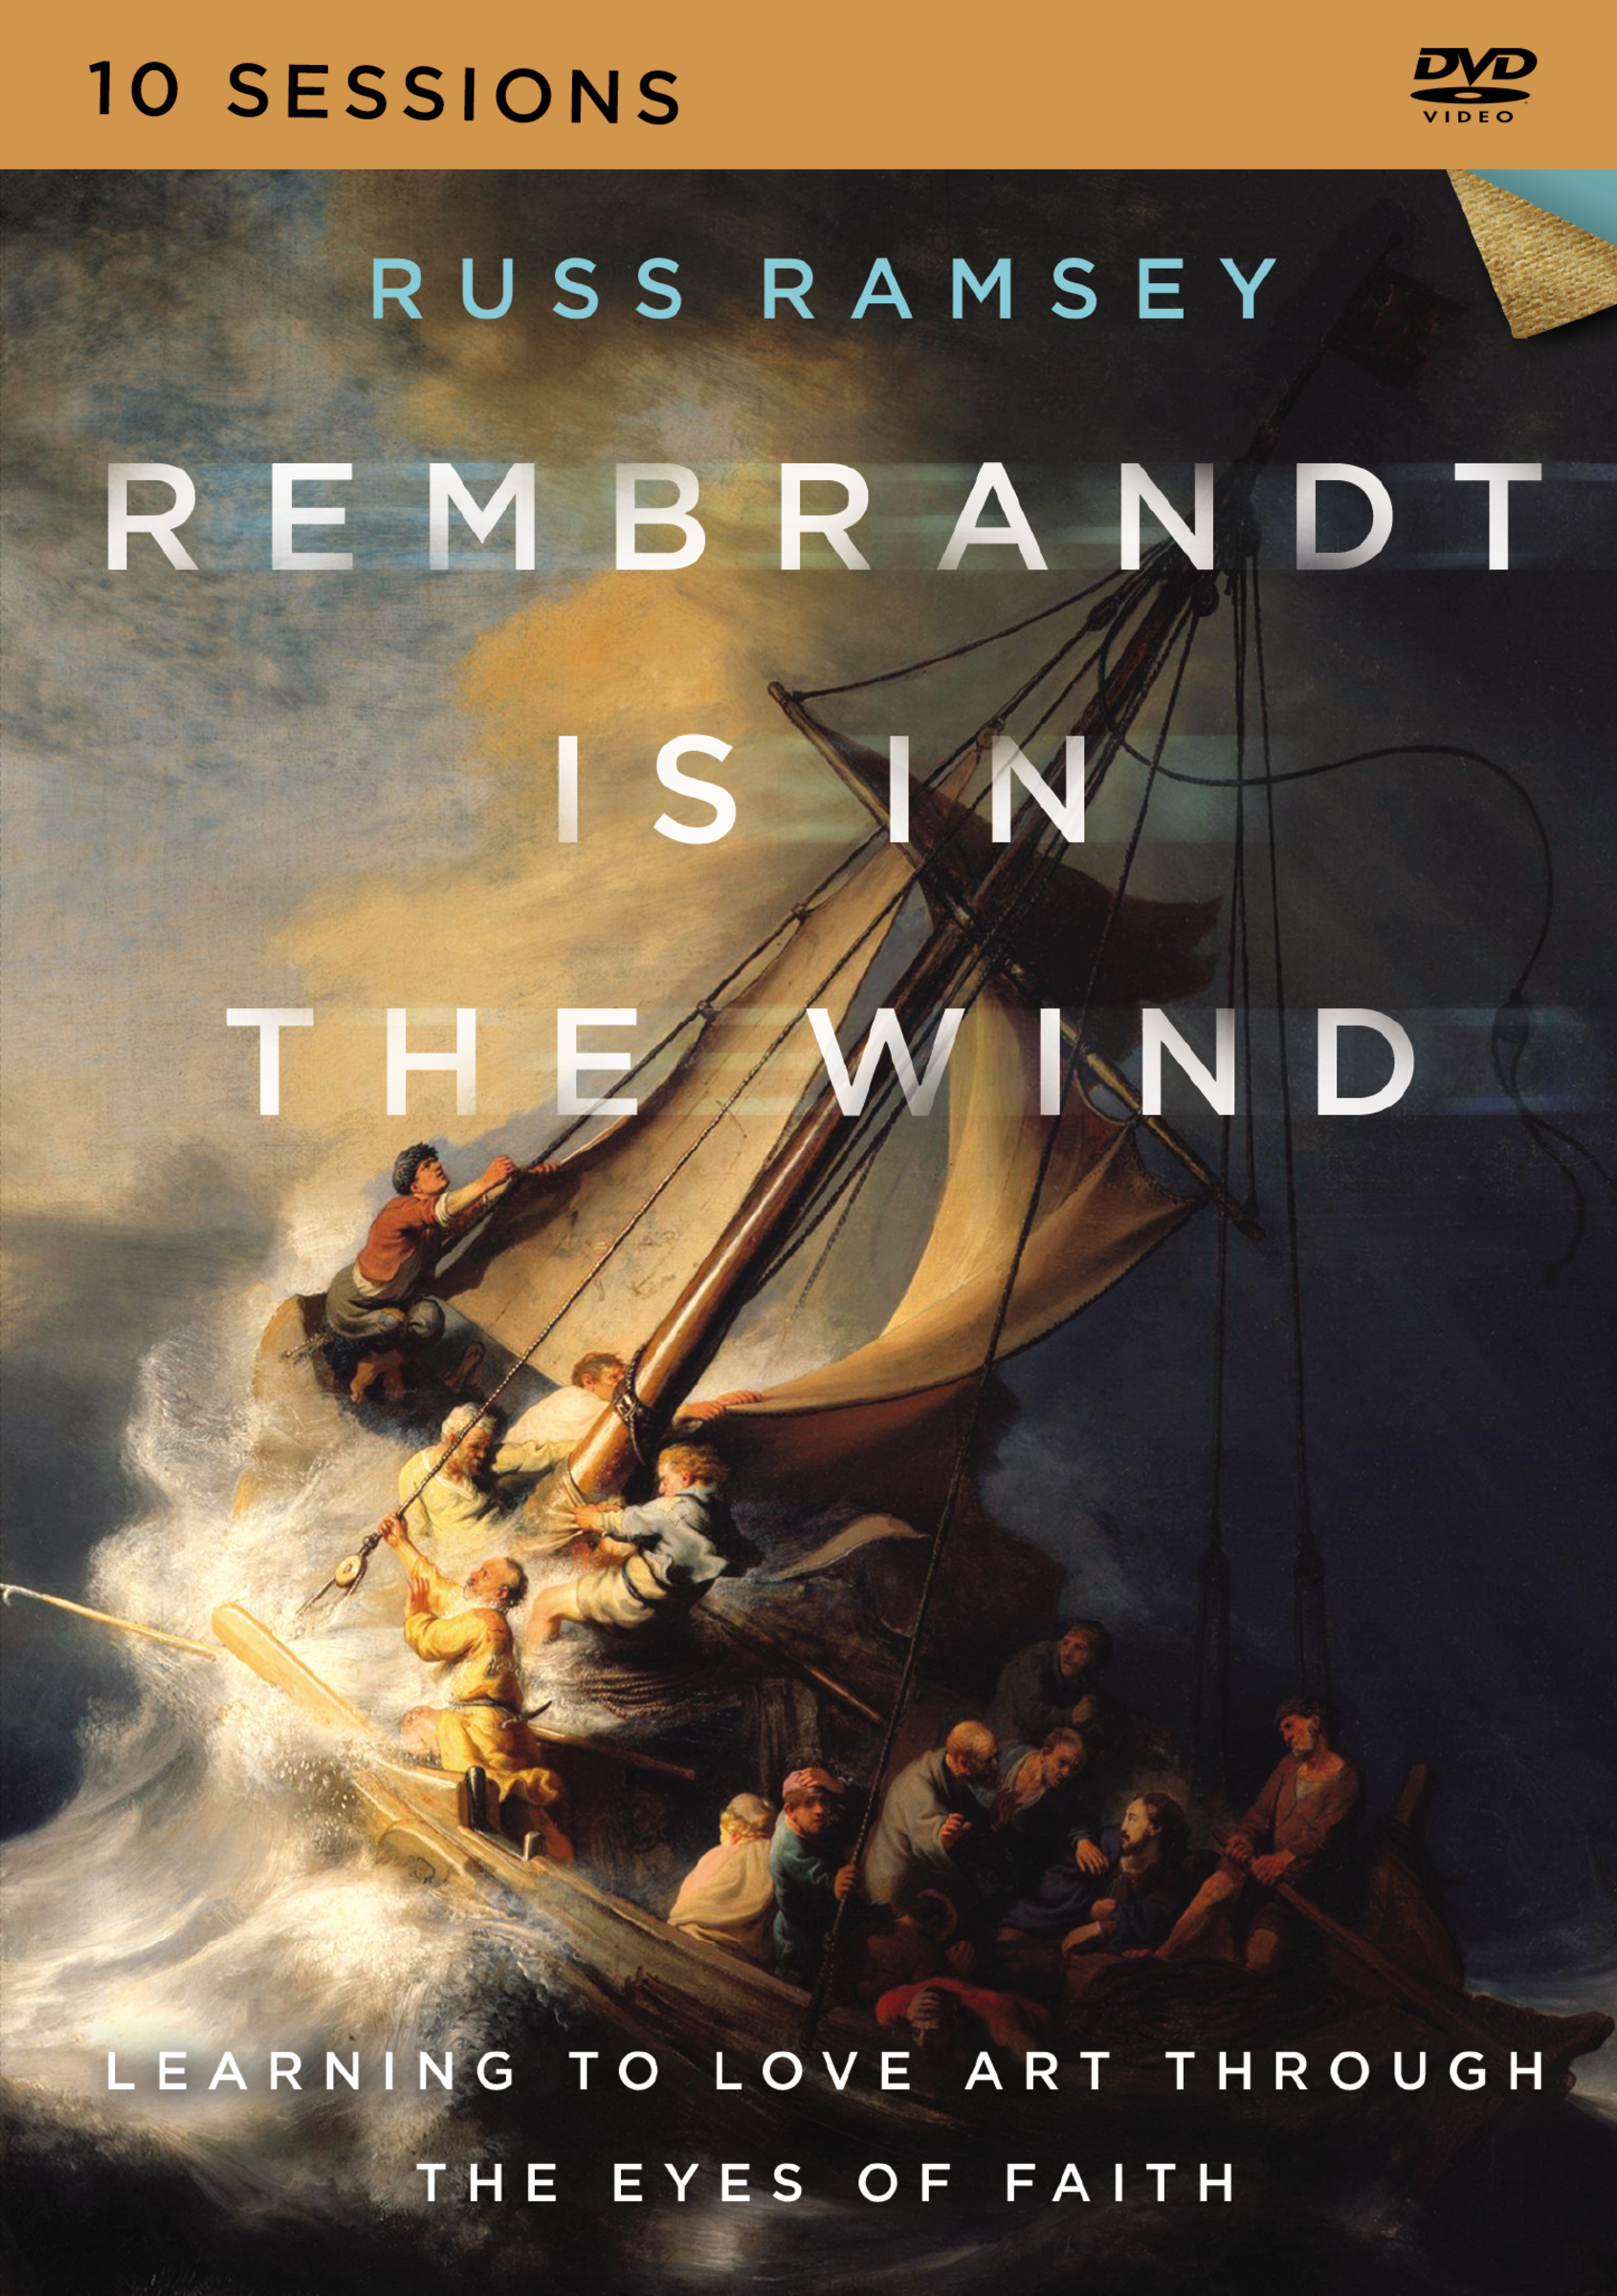 Rembrandt Is in the Wind Video Study